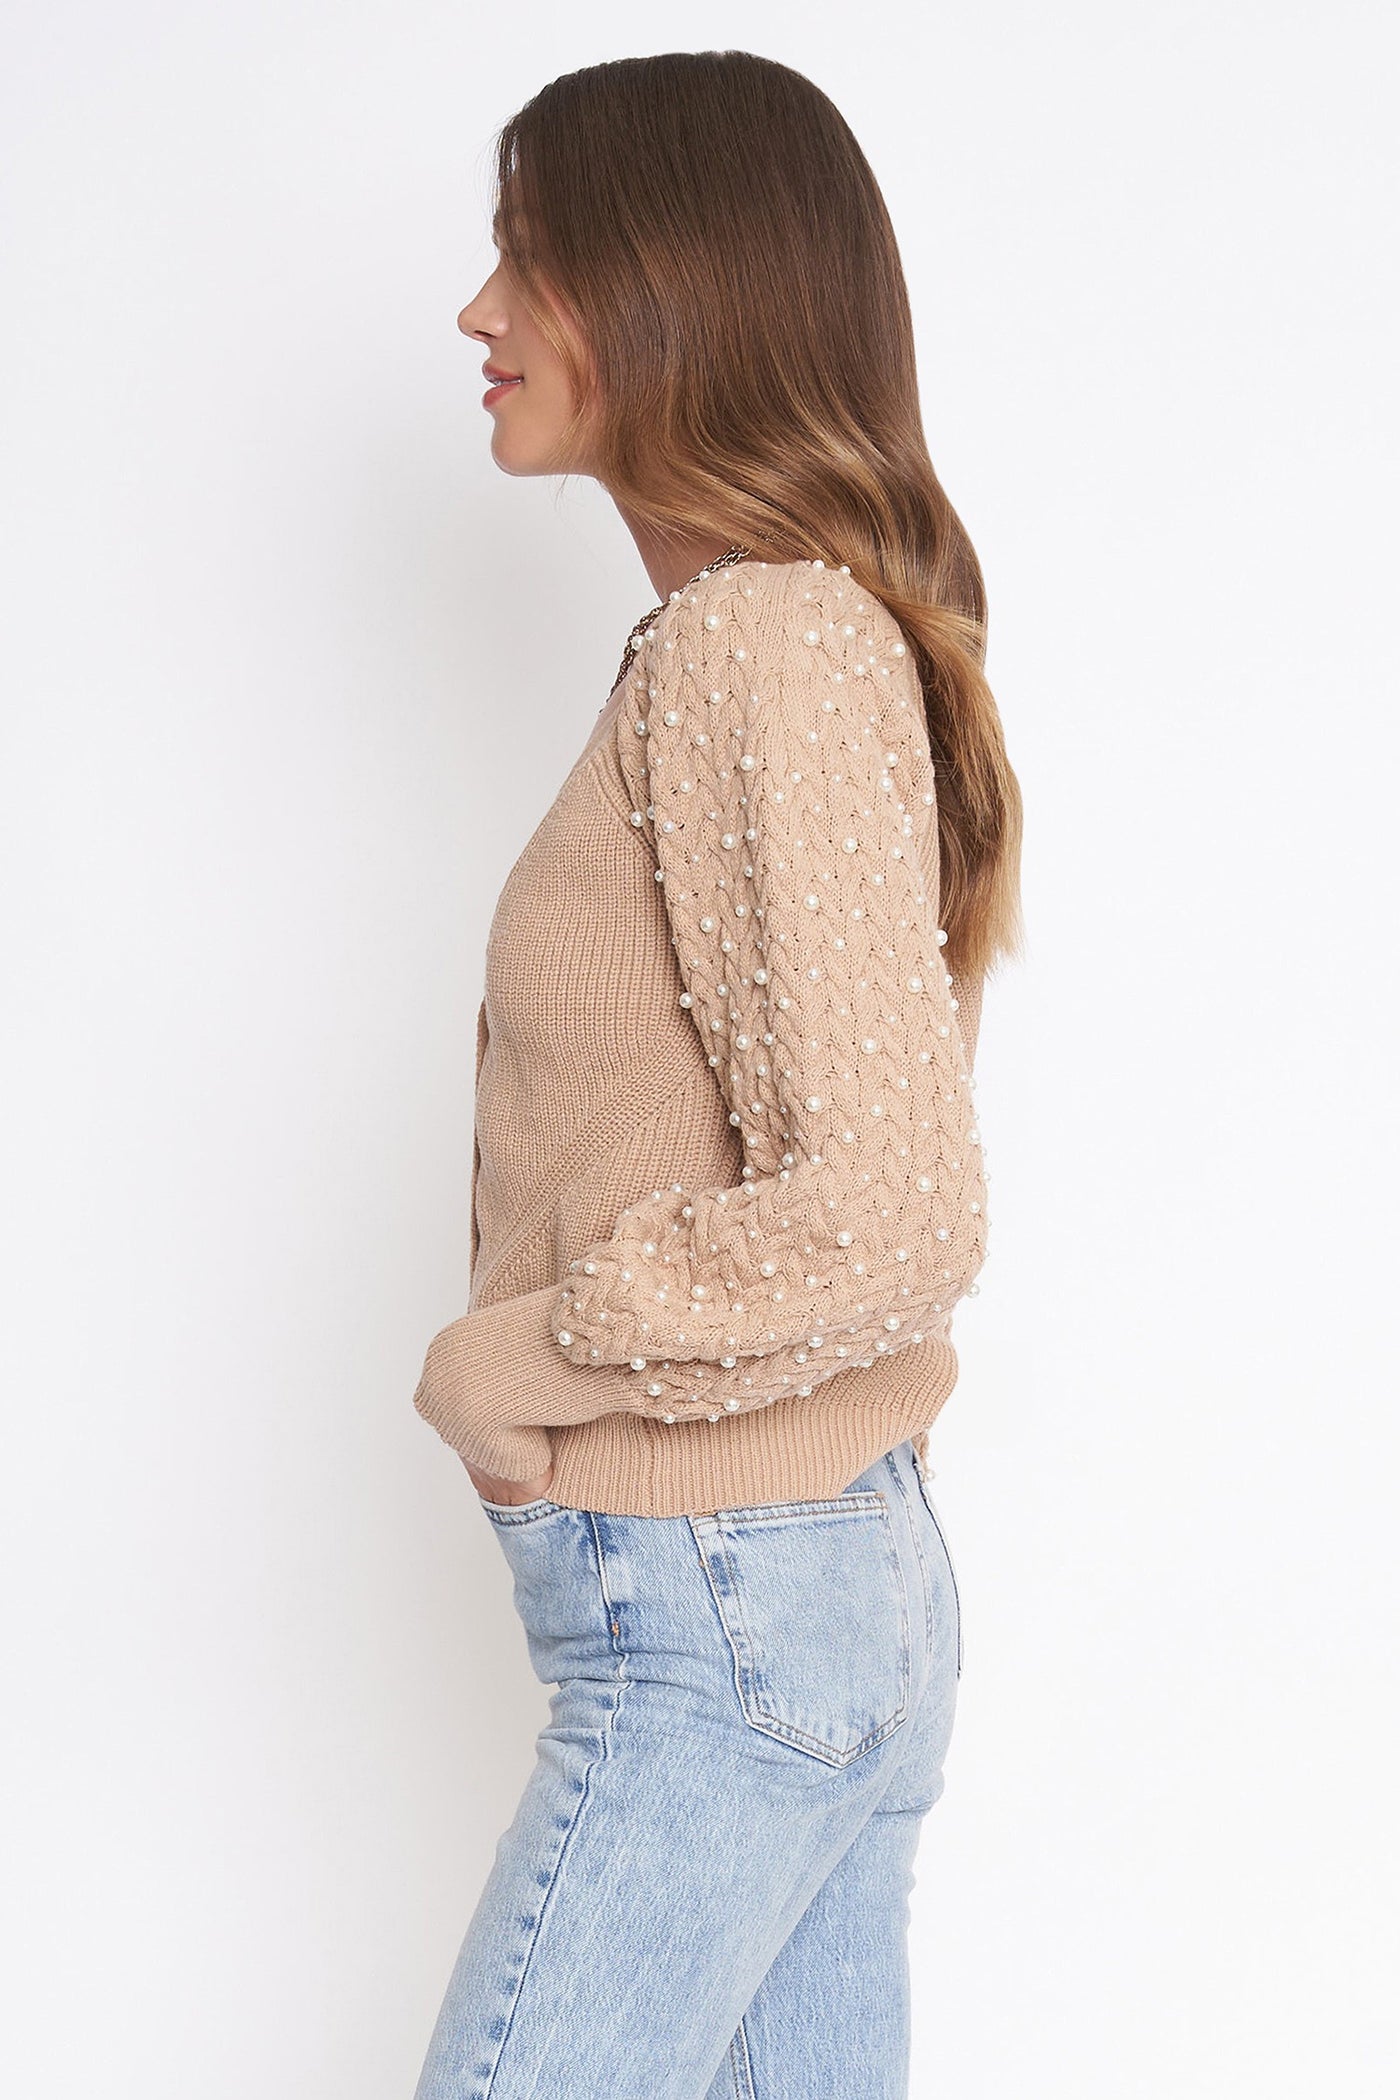 ABBY COTTON BLEND PEARL CARDIGAN - BEIGE